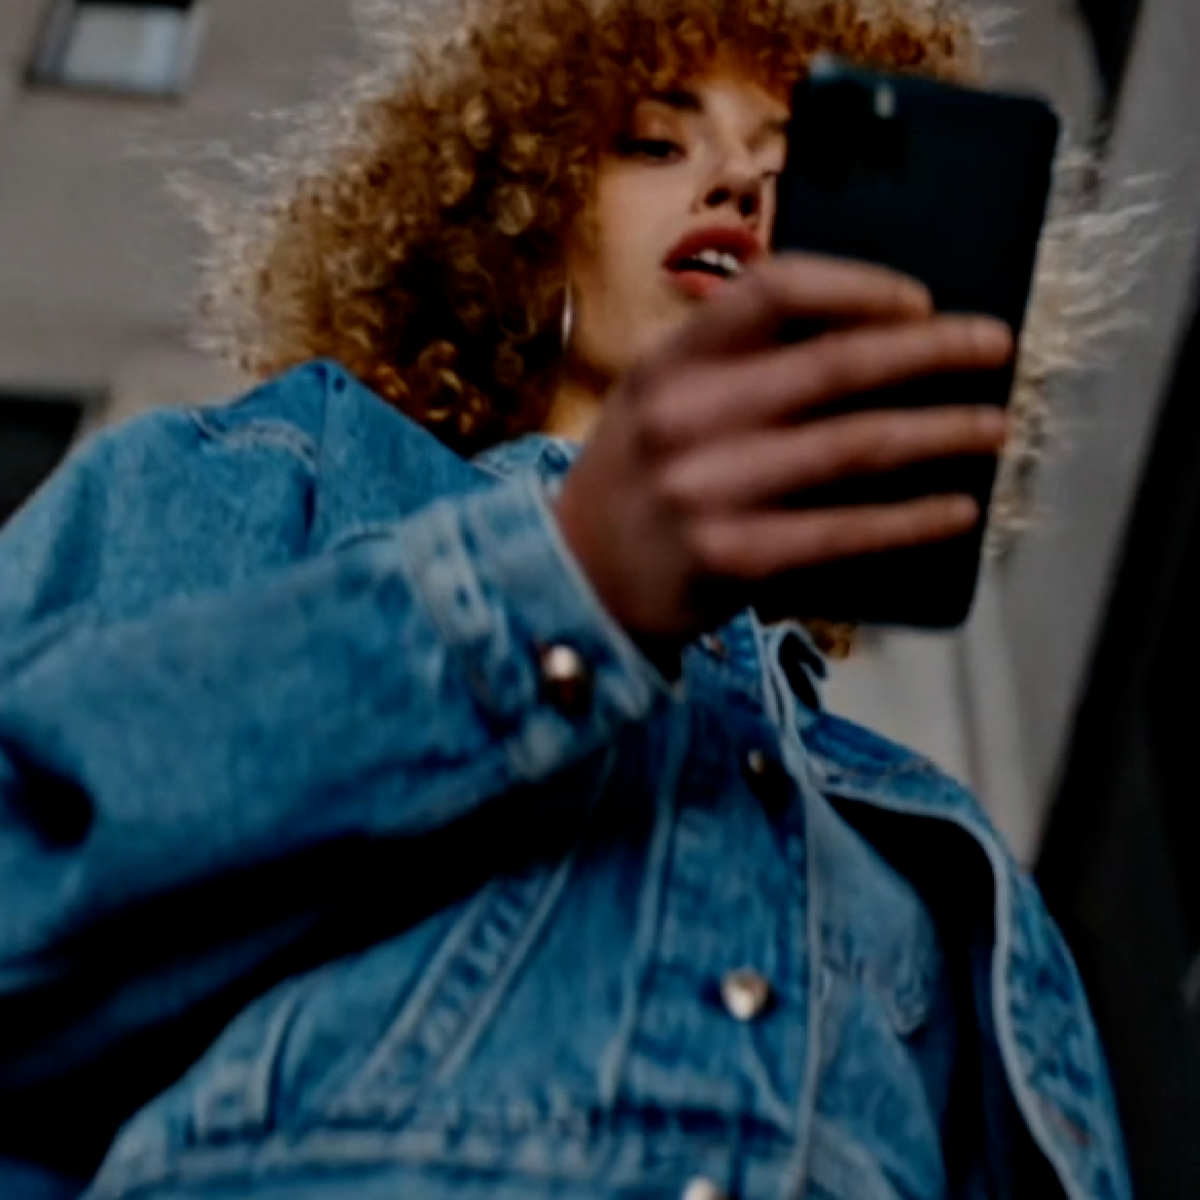 Woman using a video creating, editing, and hosting platform on her smartphone